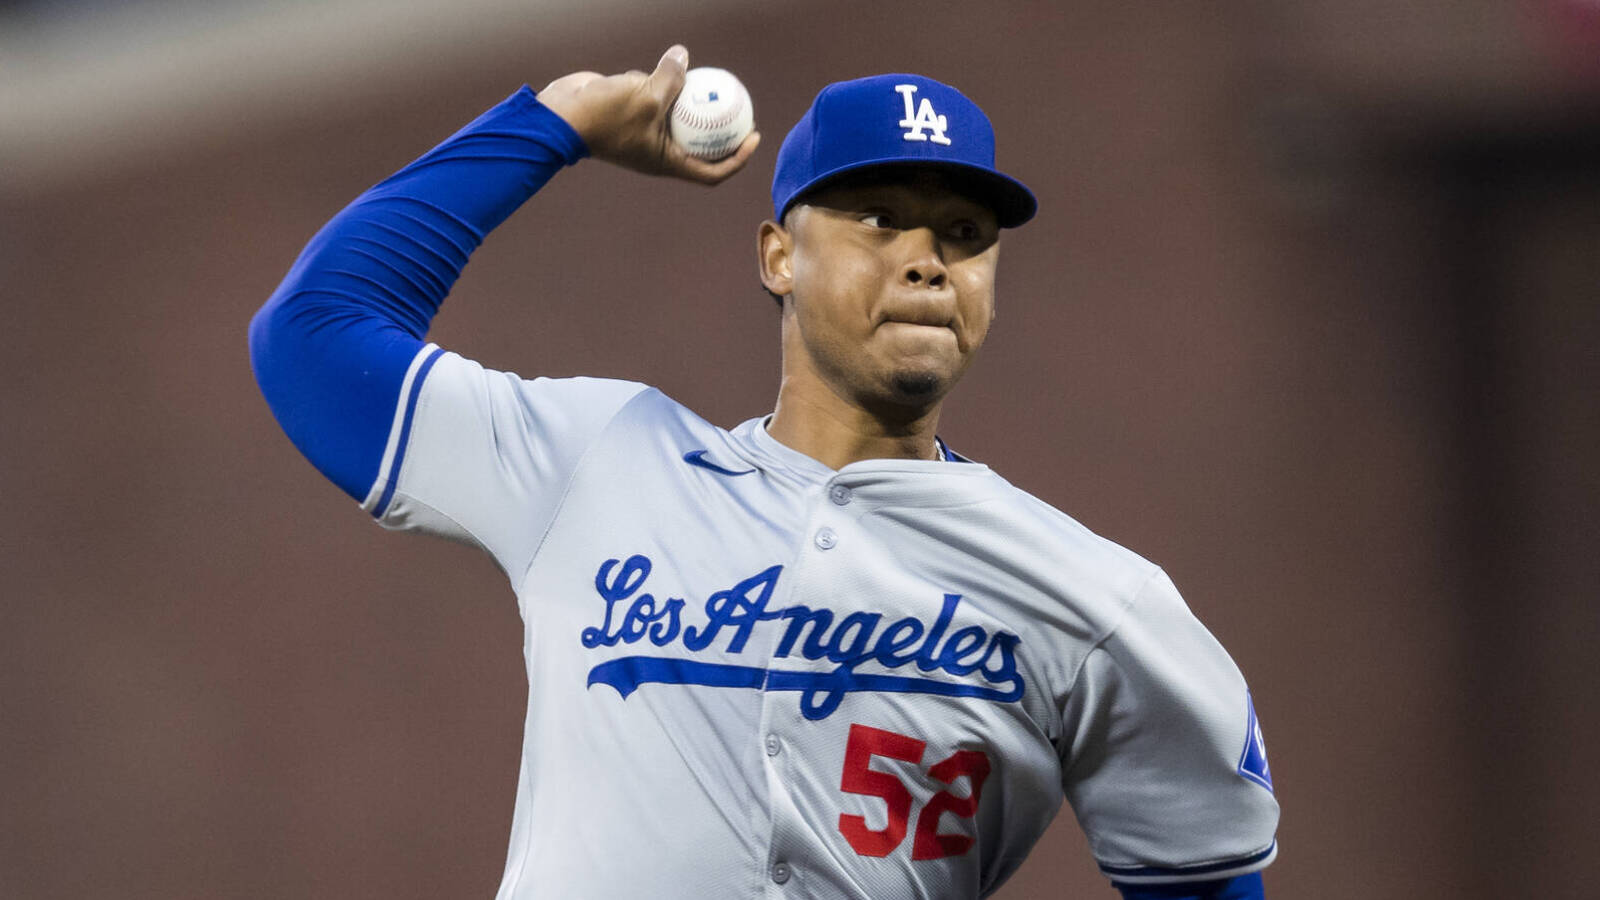 Dodgers designate veteran pitcher for assignment after disastrous outing